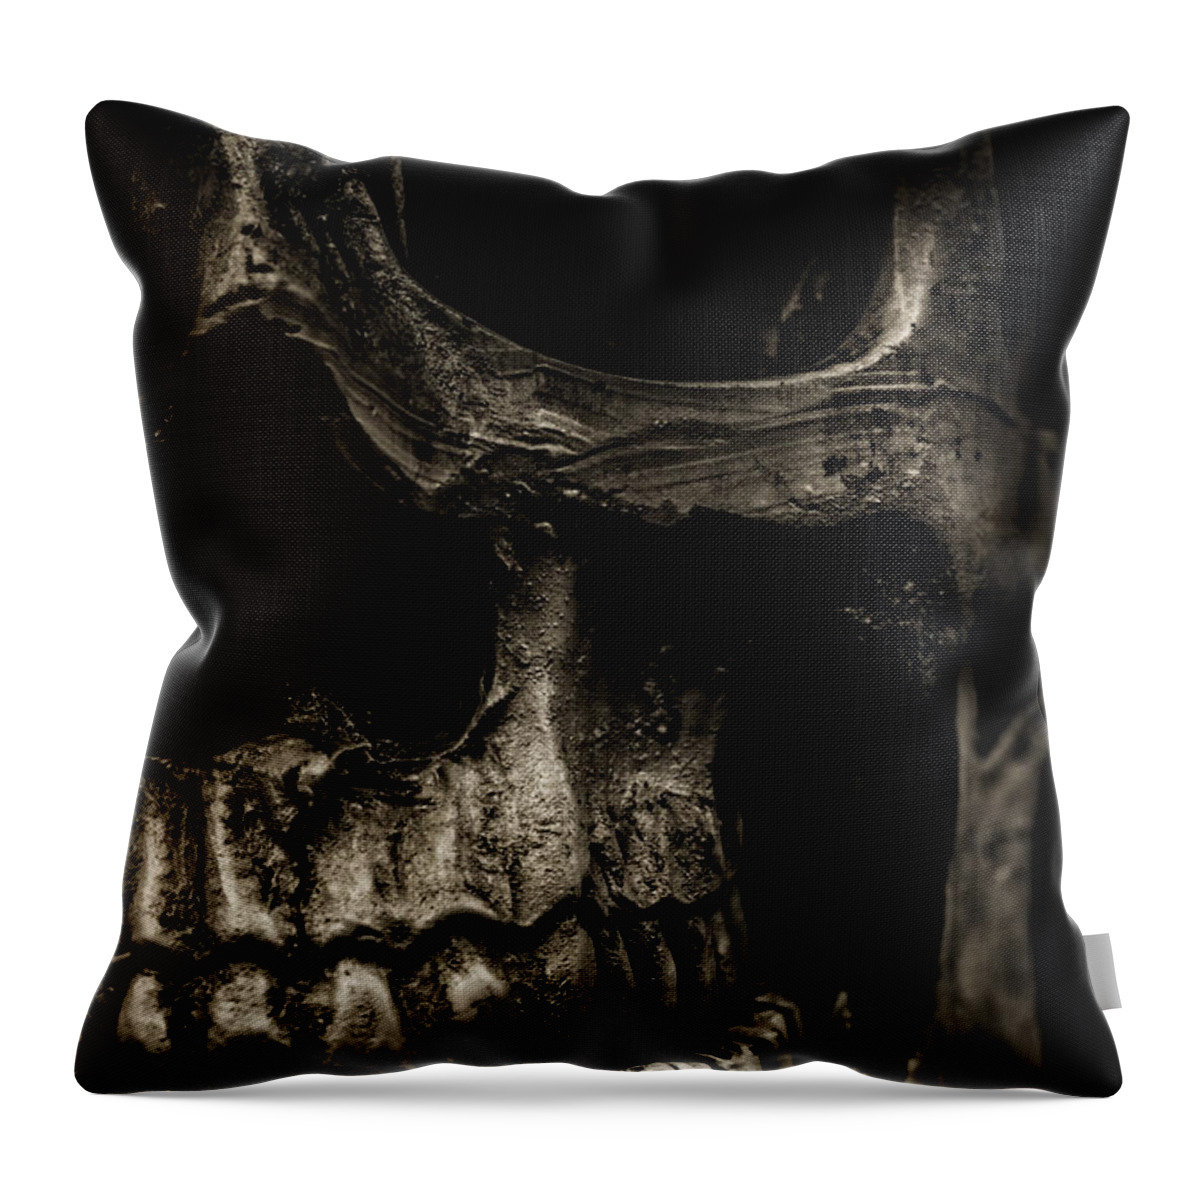 Still Life Throw Pillow featuring the photograph Scary Skull by Edward Fielding